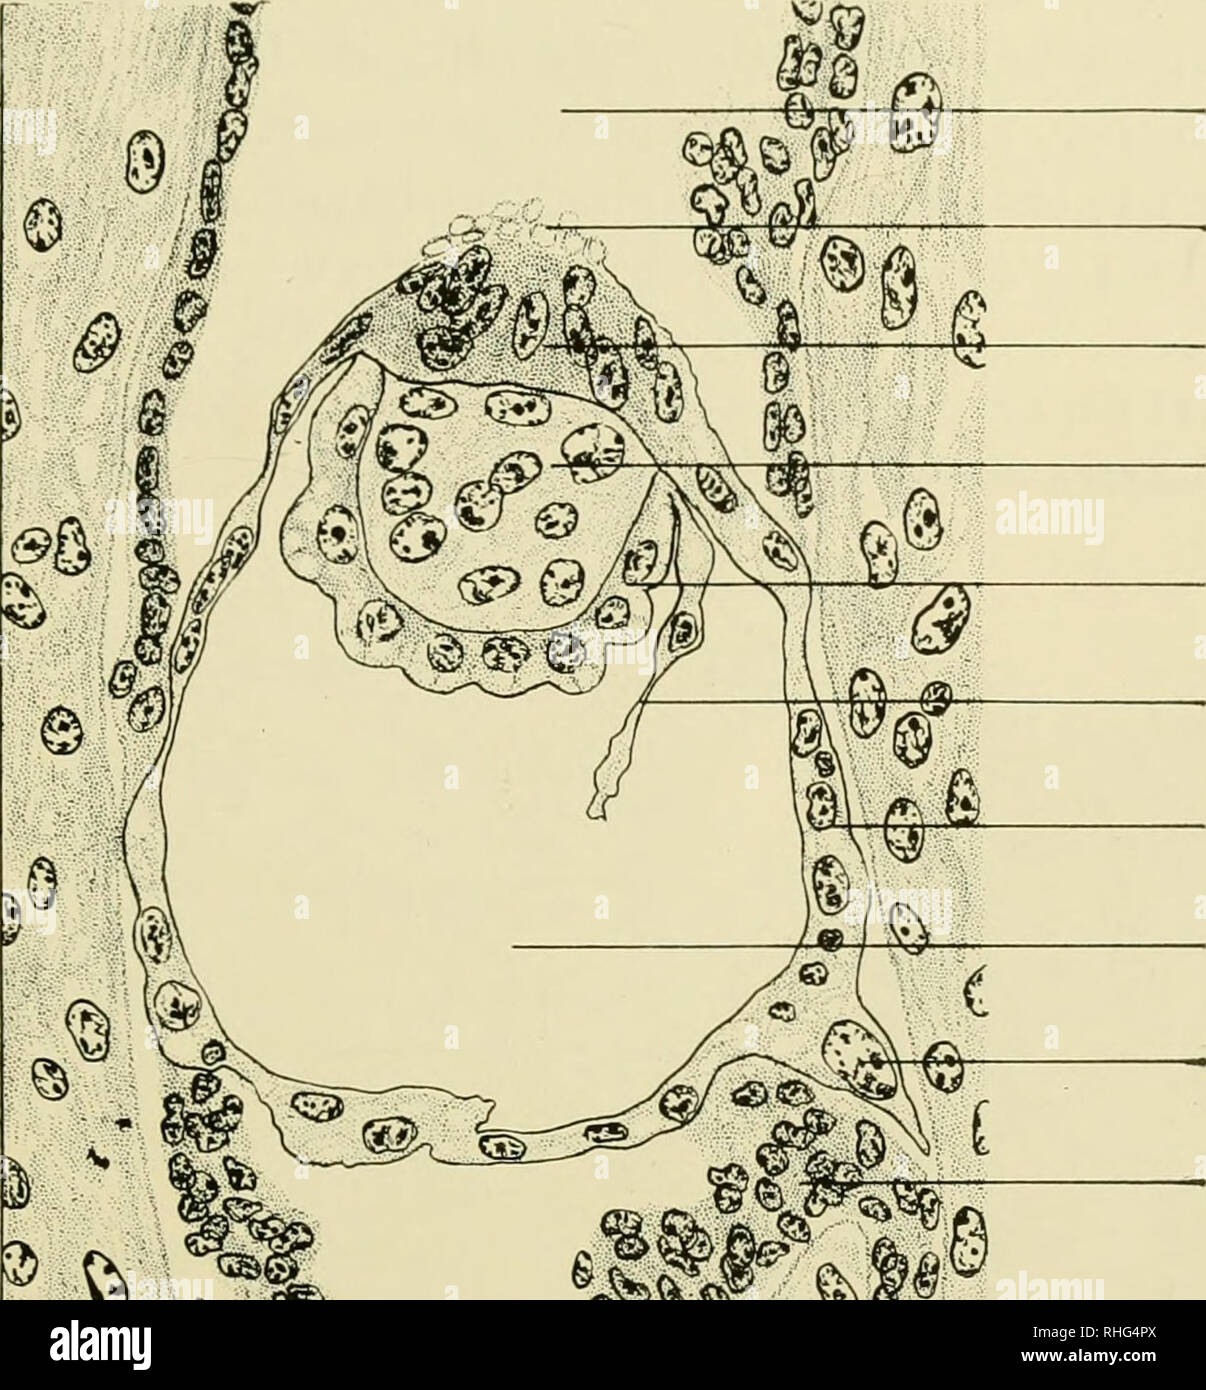 . Biology of the laboratory mouse. Mice as laboratory animals; Mice; Animals, Laboratory; Mice. THE EARLY EMBRYOLOGY OF THE MOUSE g elongated nuclei, and a ventral, more lightly staining portion with round nuclei* (Fig. 6). The former gives rise to various extra-embryonic struc- fa ^. t% r-3 uterine lumen Droplets of secretion Extra-embryonic ectoderm Embryonic ectoderm Proximal entoderm Distal entoderm Trophectoderm Yolk cavity — Giant cell Degenerating uterine epithelium. % (^W ^^' ^. Soh*.n Fig. 6.—^Longitudinal section of early egg cylinder stage at 4 days 15 hours after mating. Projection Stock Photo